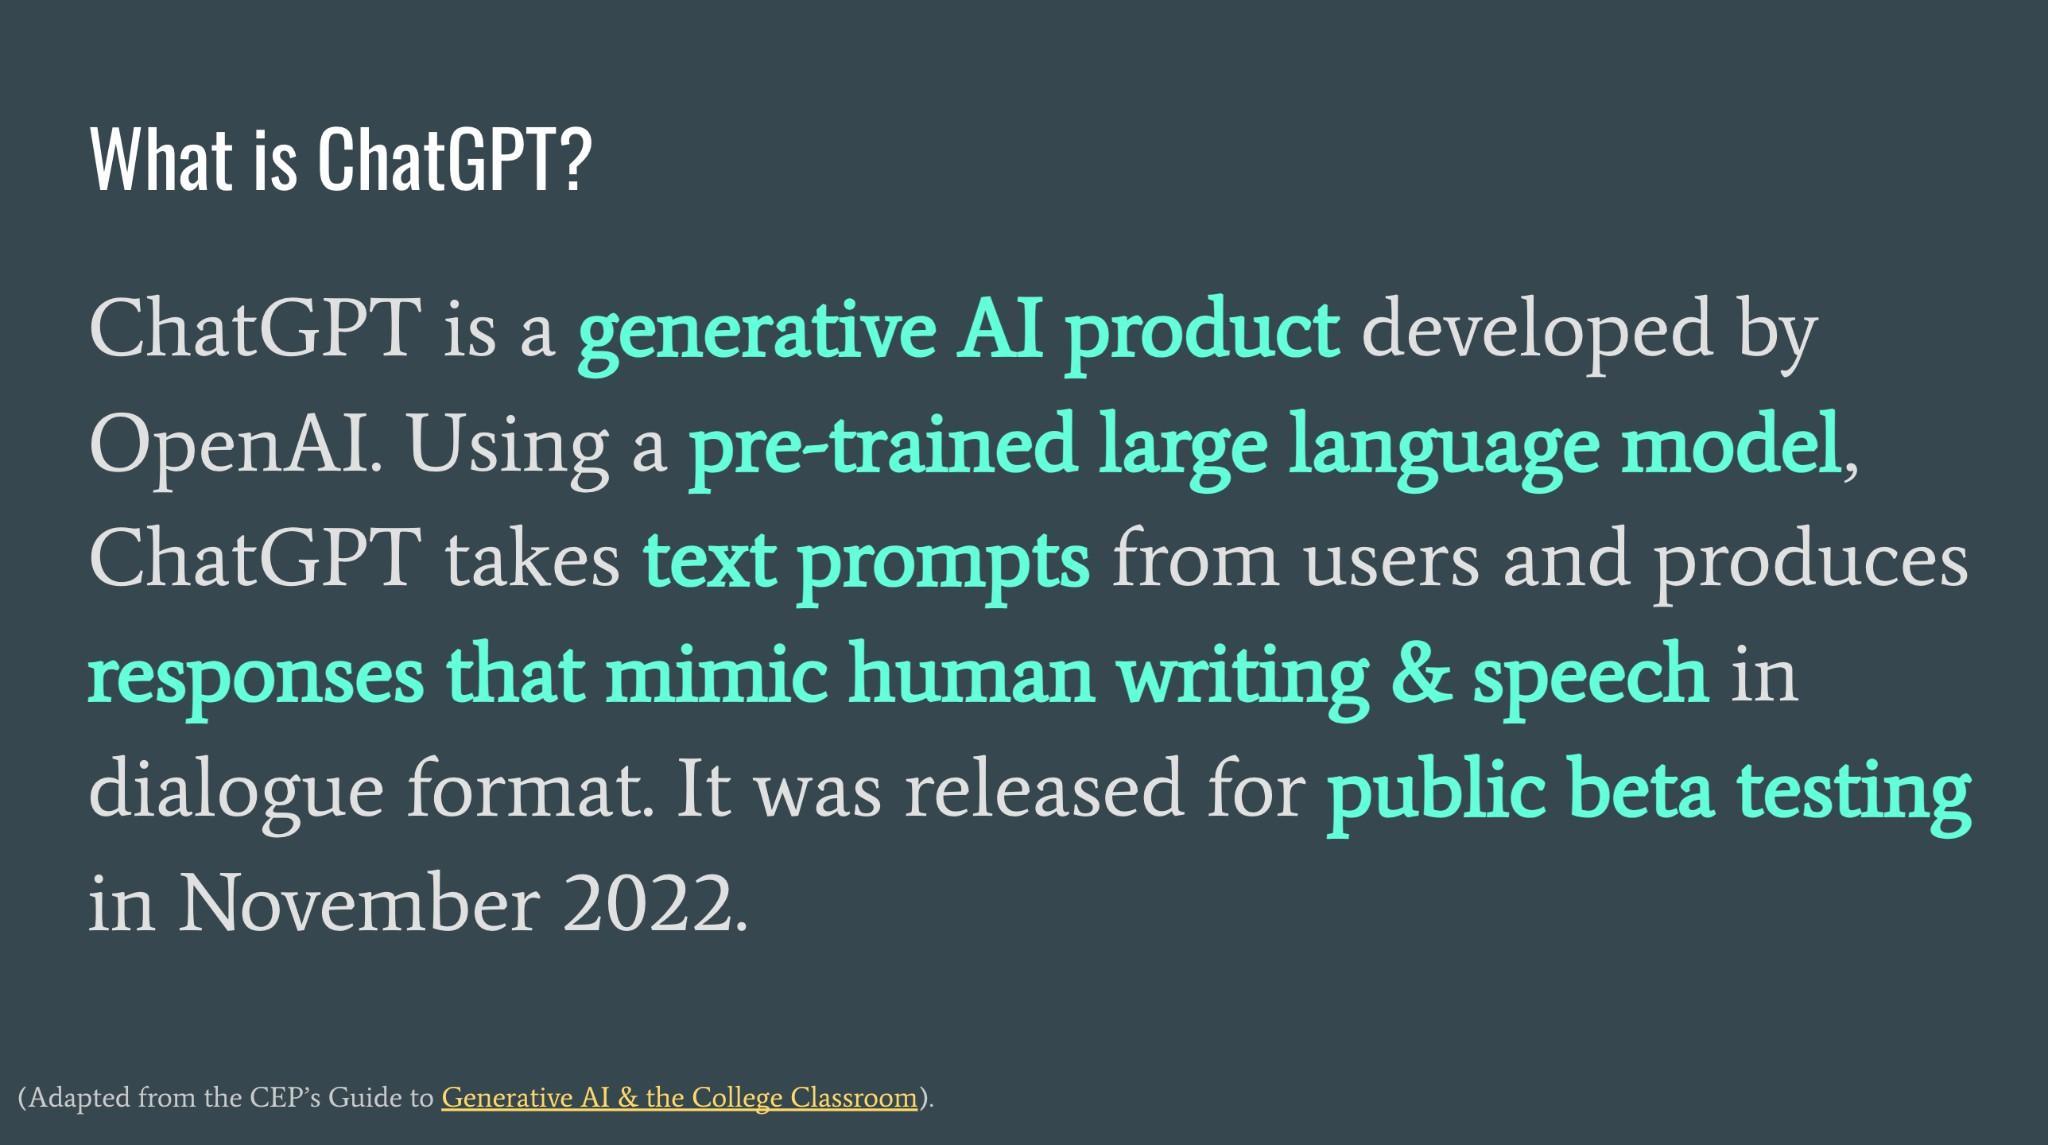 Screen capture adapted from the Barnard College Center for Engaged Pedagogy's guide to Generative AI and the College Classroom. The text reads as follows: 'What is ChatGPT? ChatGPT is a generative AI product developed by OpenAI. Using a pre-trained large language model, ChatGPT takes text prompts from users and produces responses that mimic human writing and speech in dialogue format. It was released for public beta testing in November 2022.'